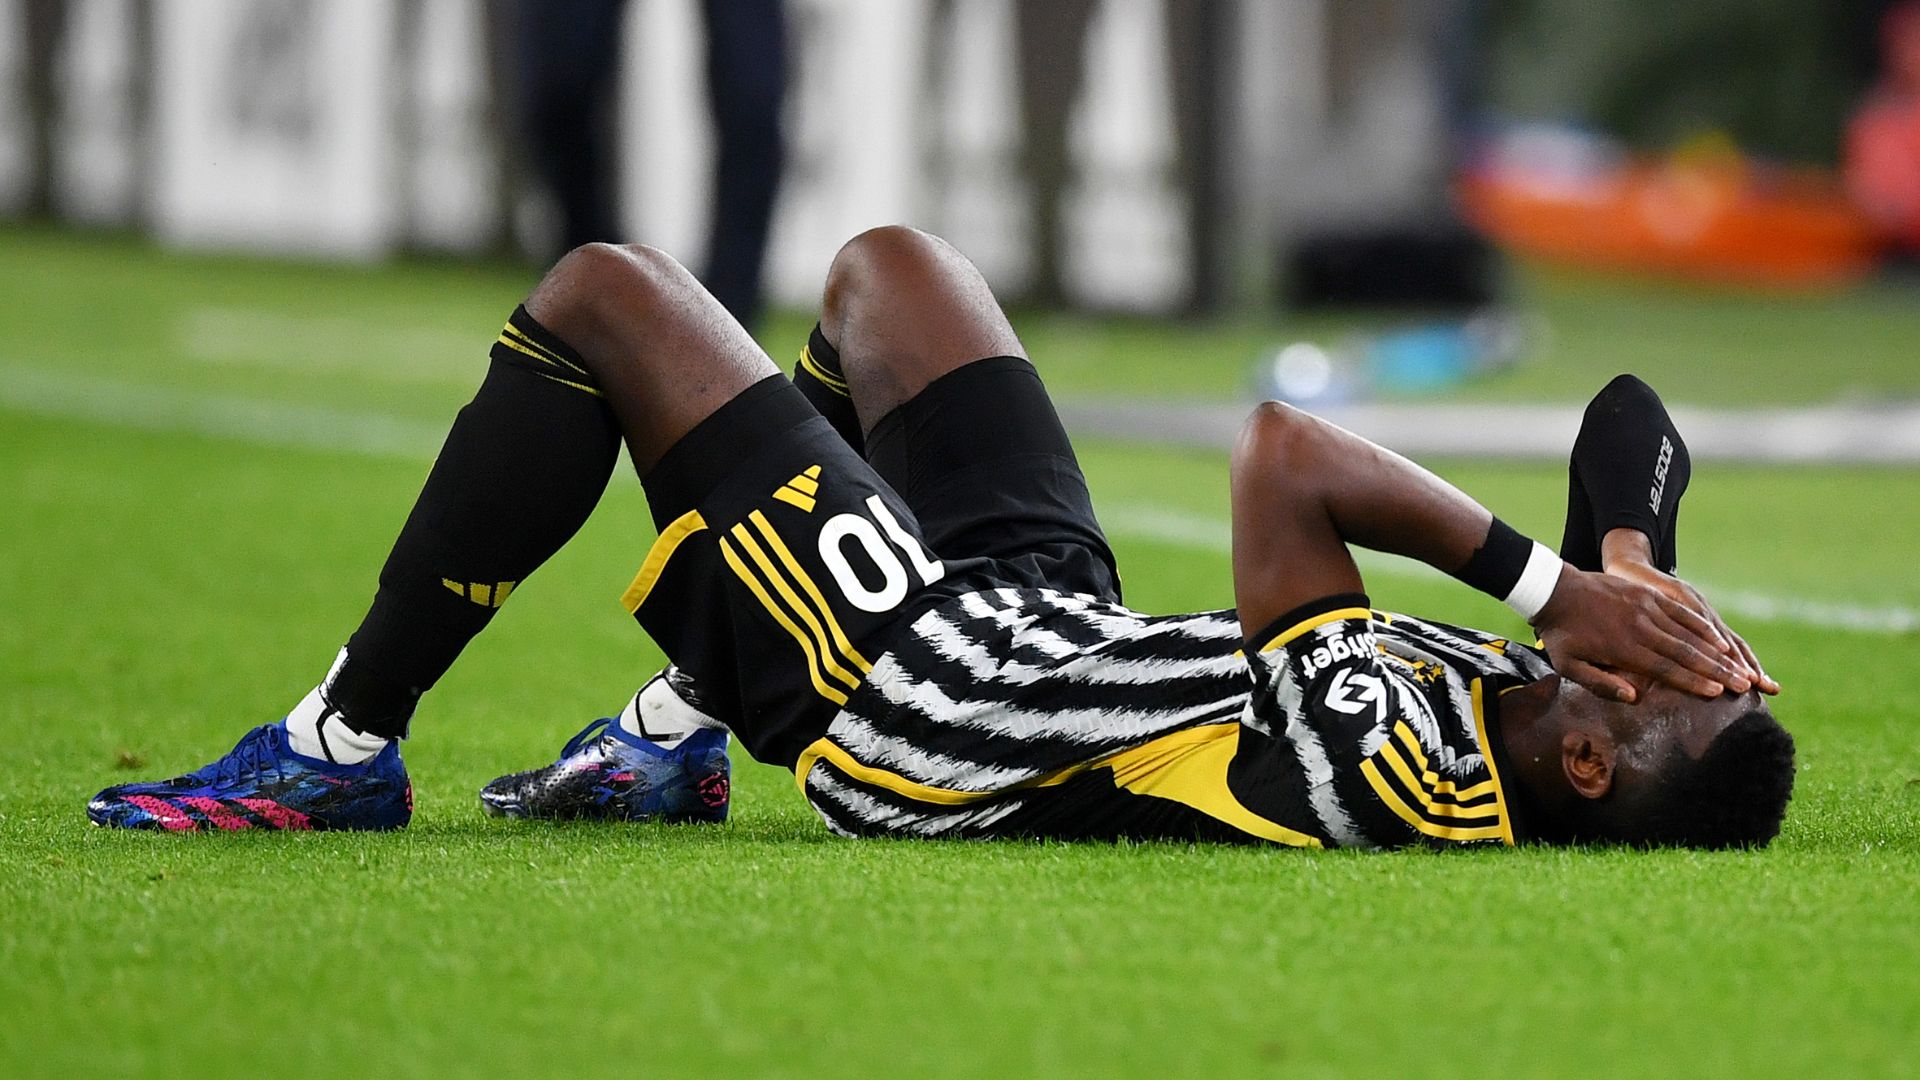 Pogba suffered heavily from injuries last season (Credit: Getty Images)